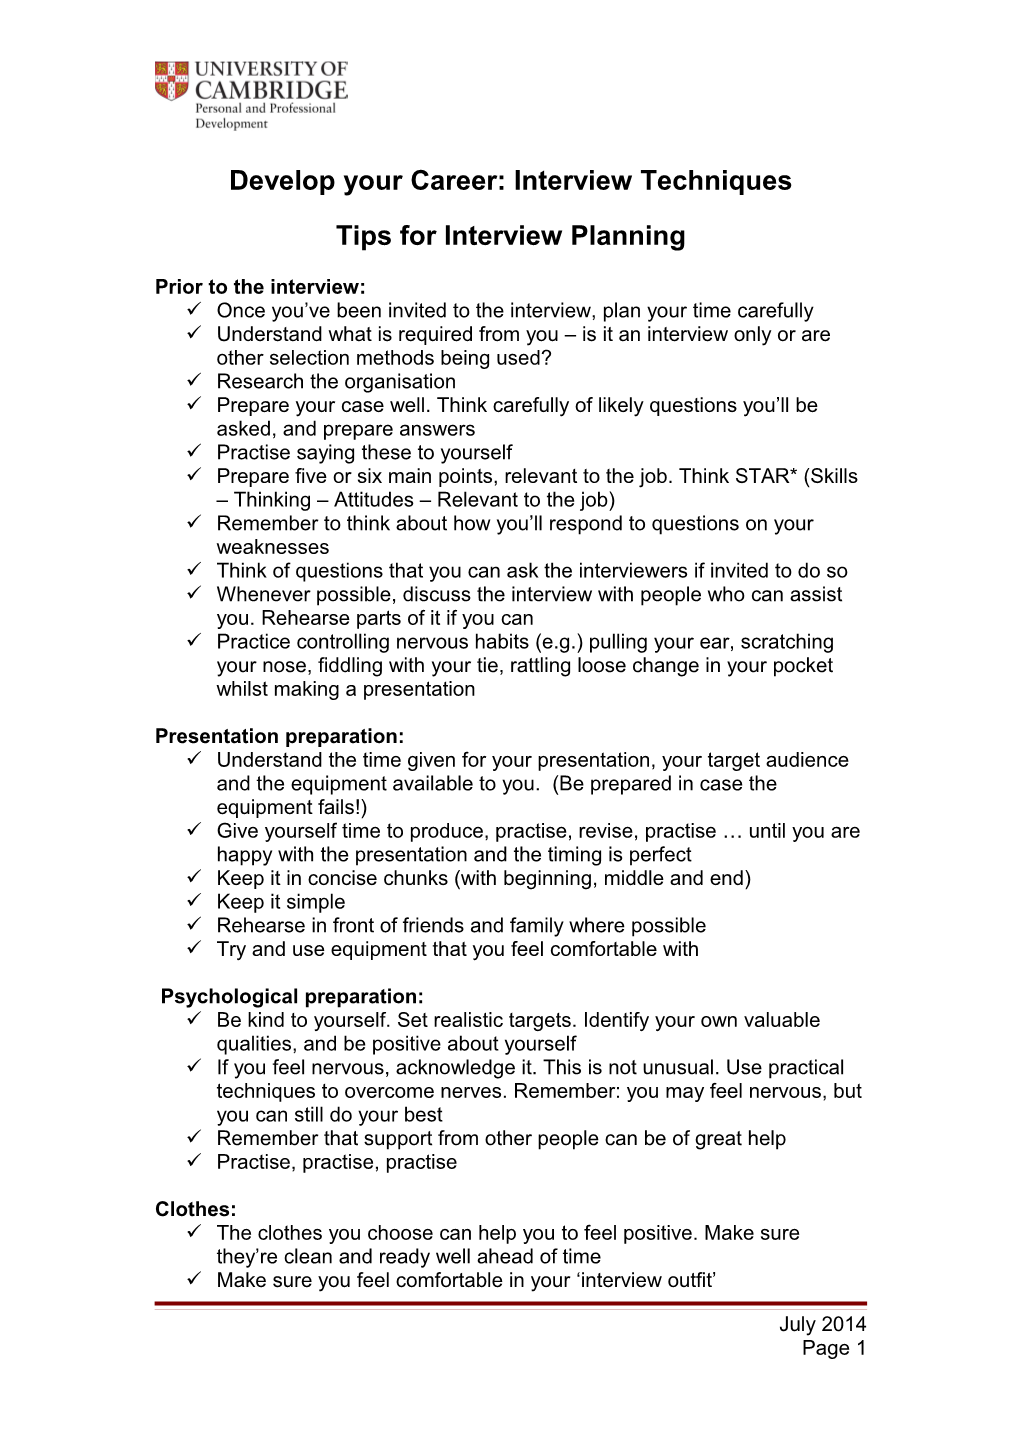 Tips and Hints for Interview Planning